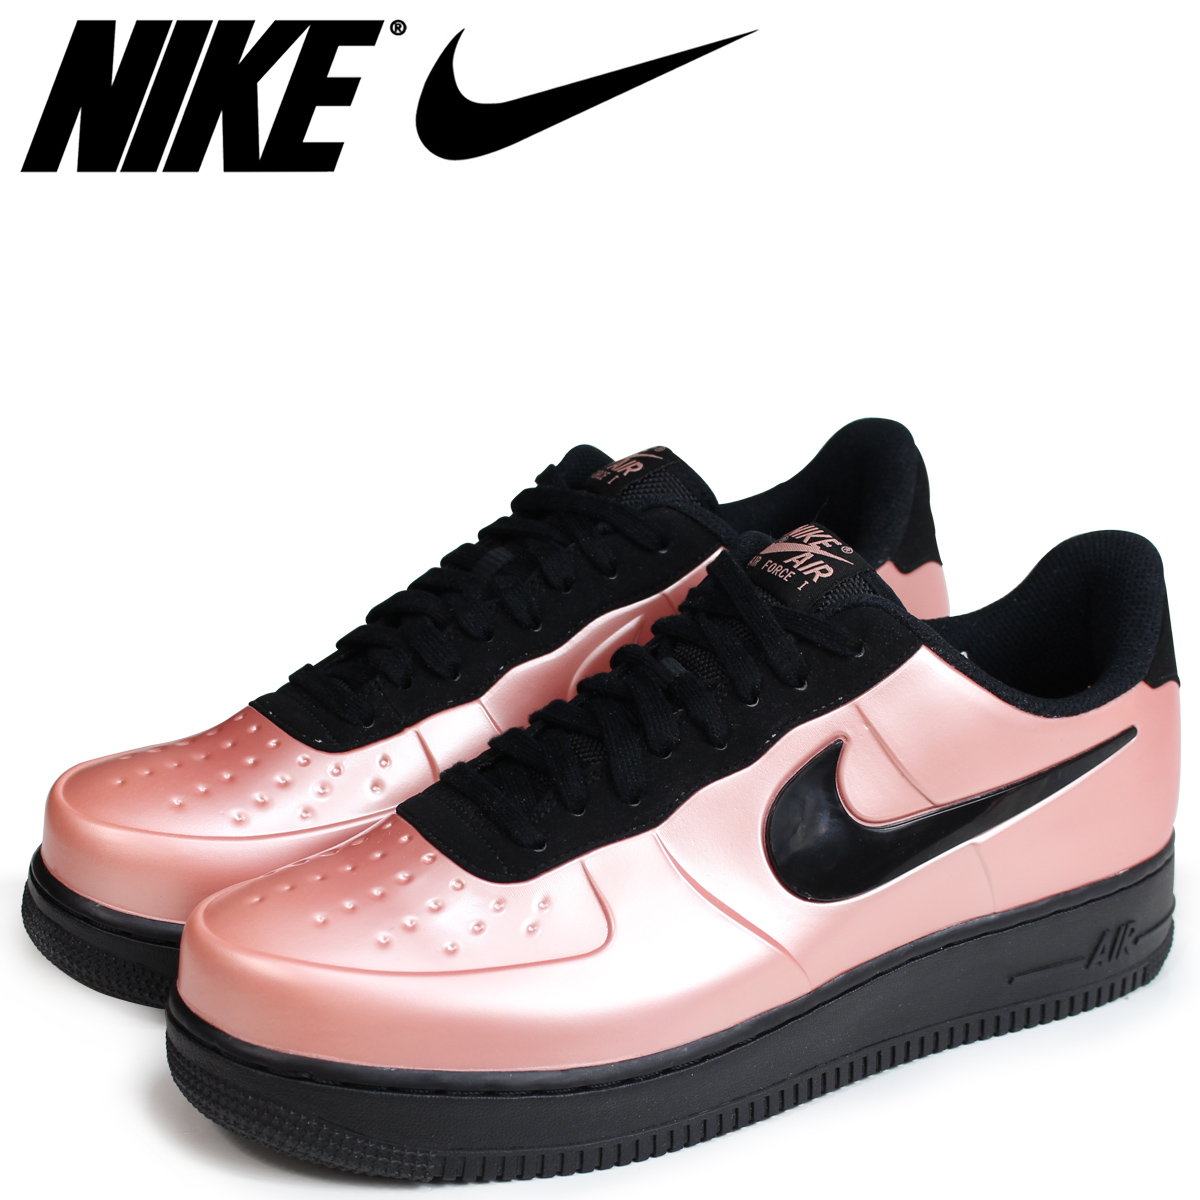 pink foamposite air force 1